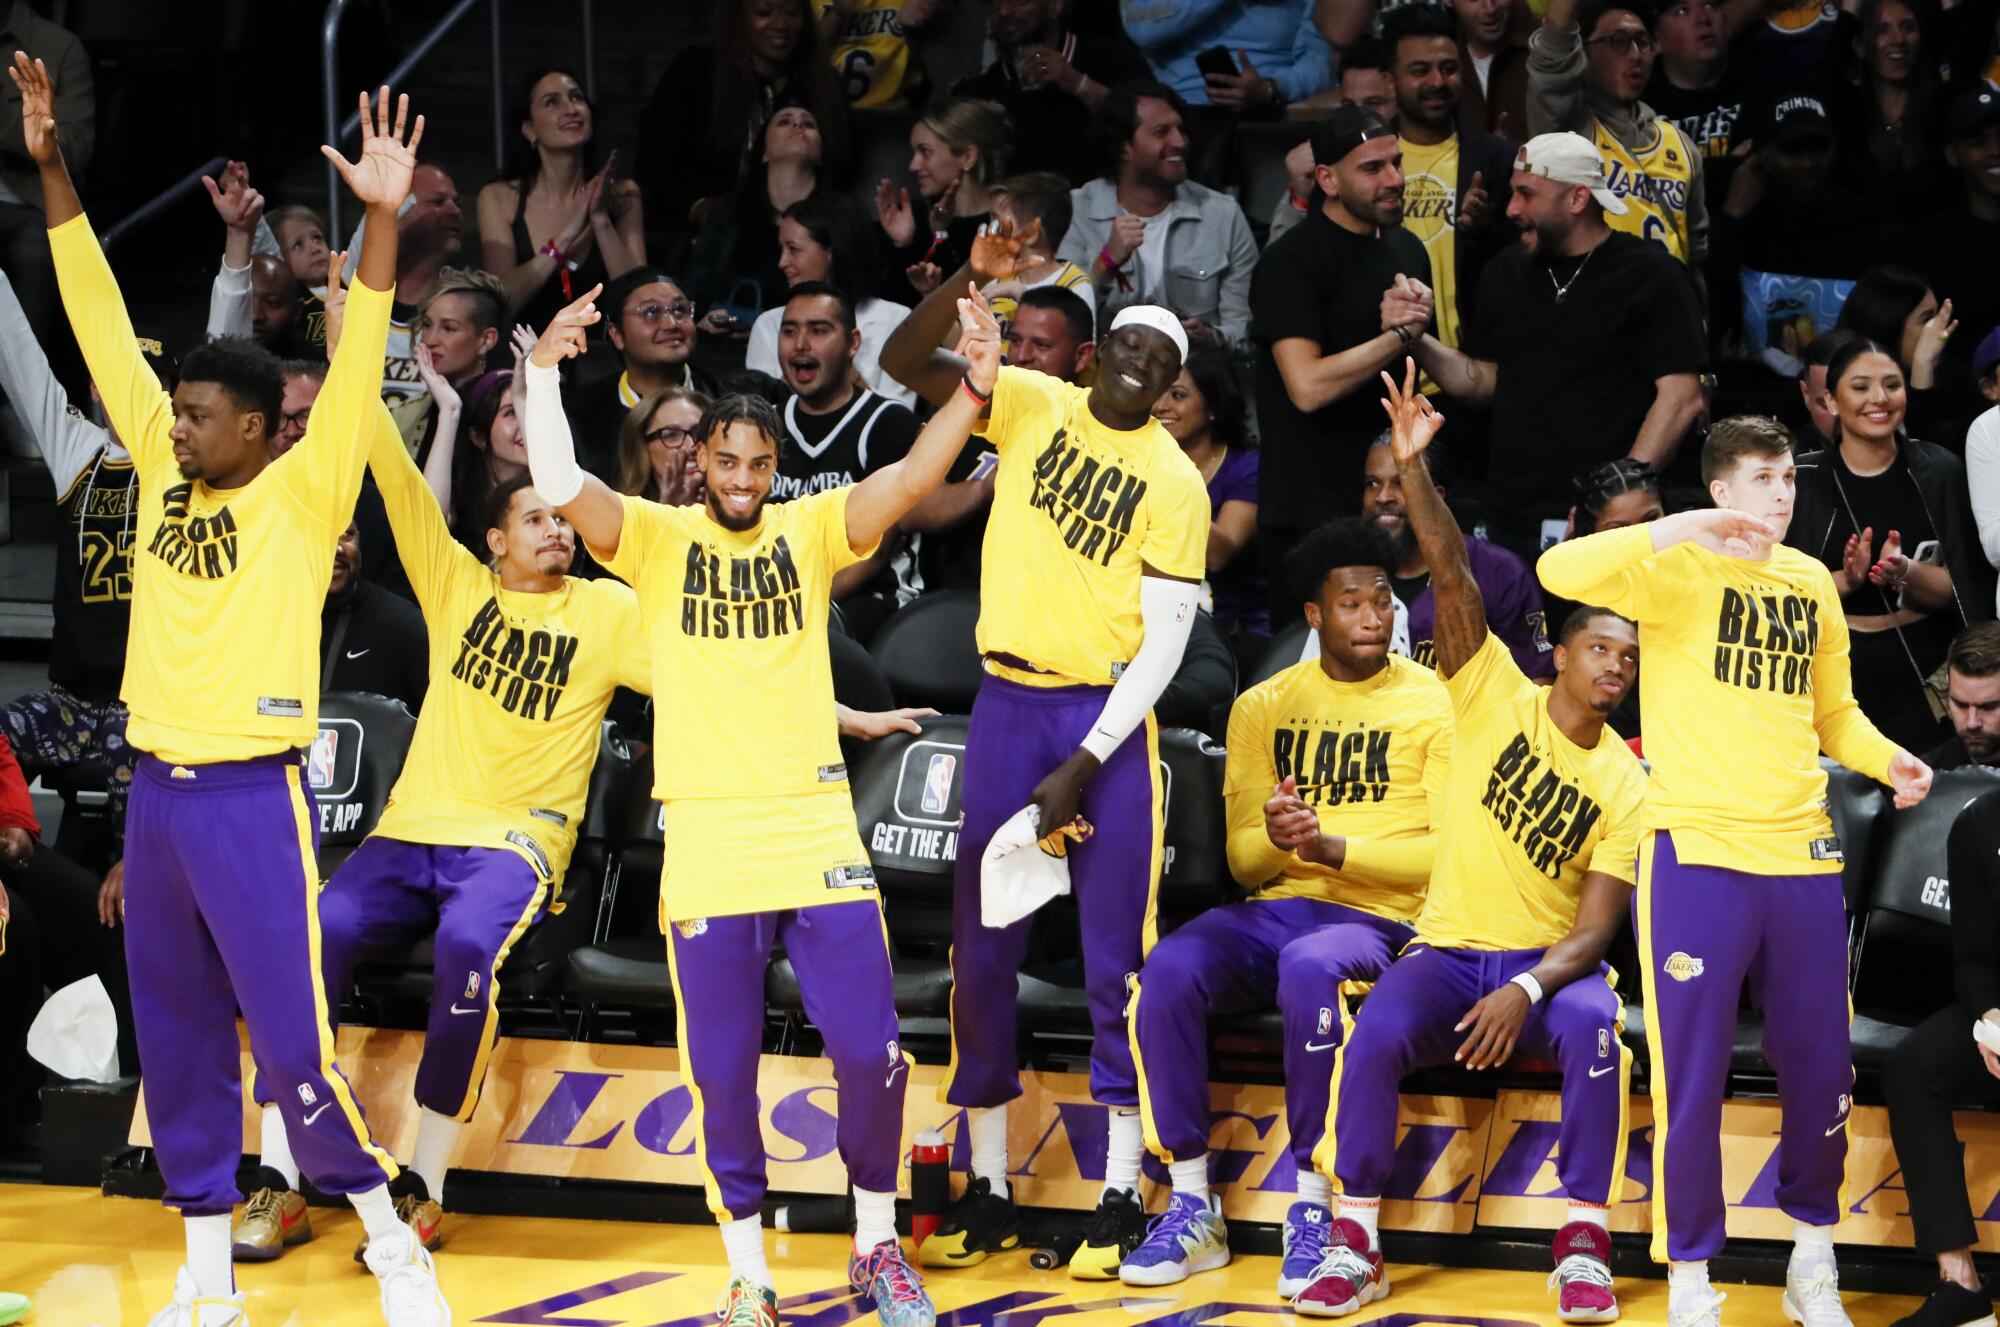 Players on the Lakers bench celebrate after LeBron James makes a shot.